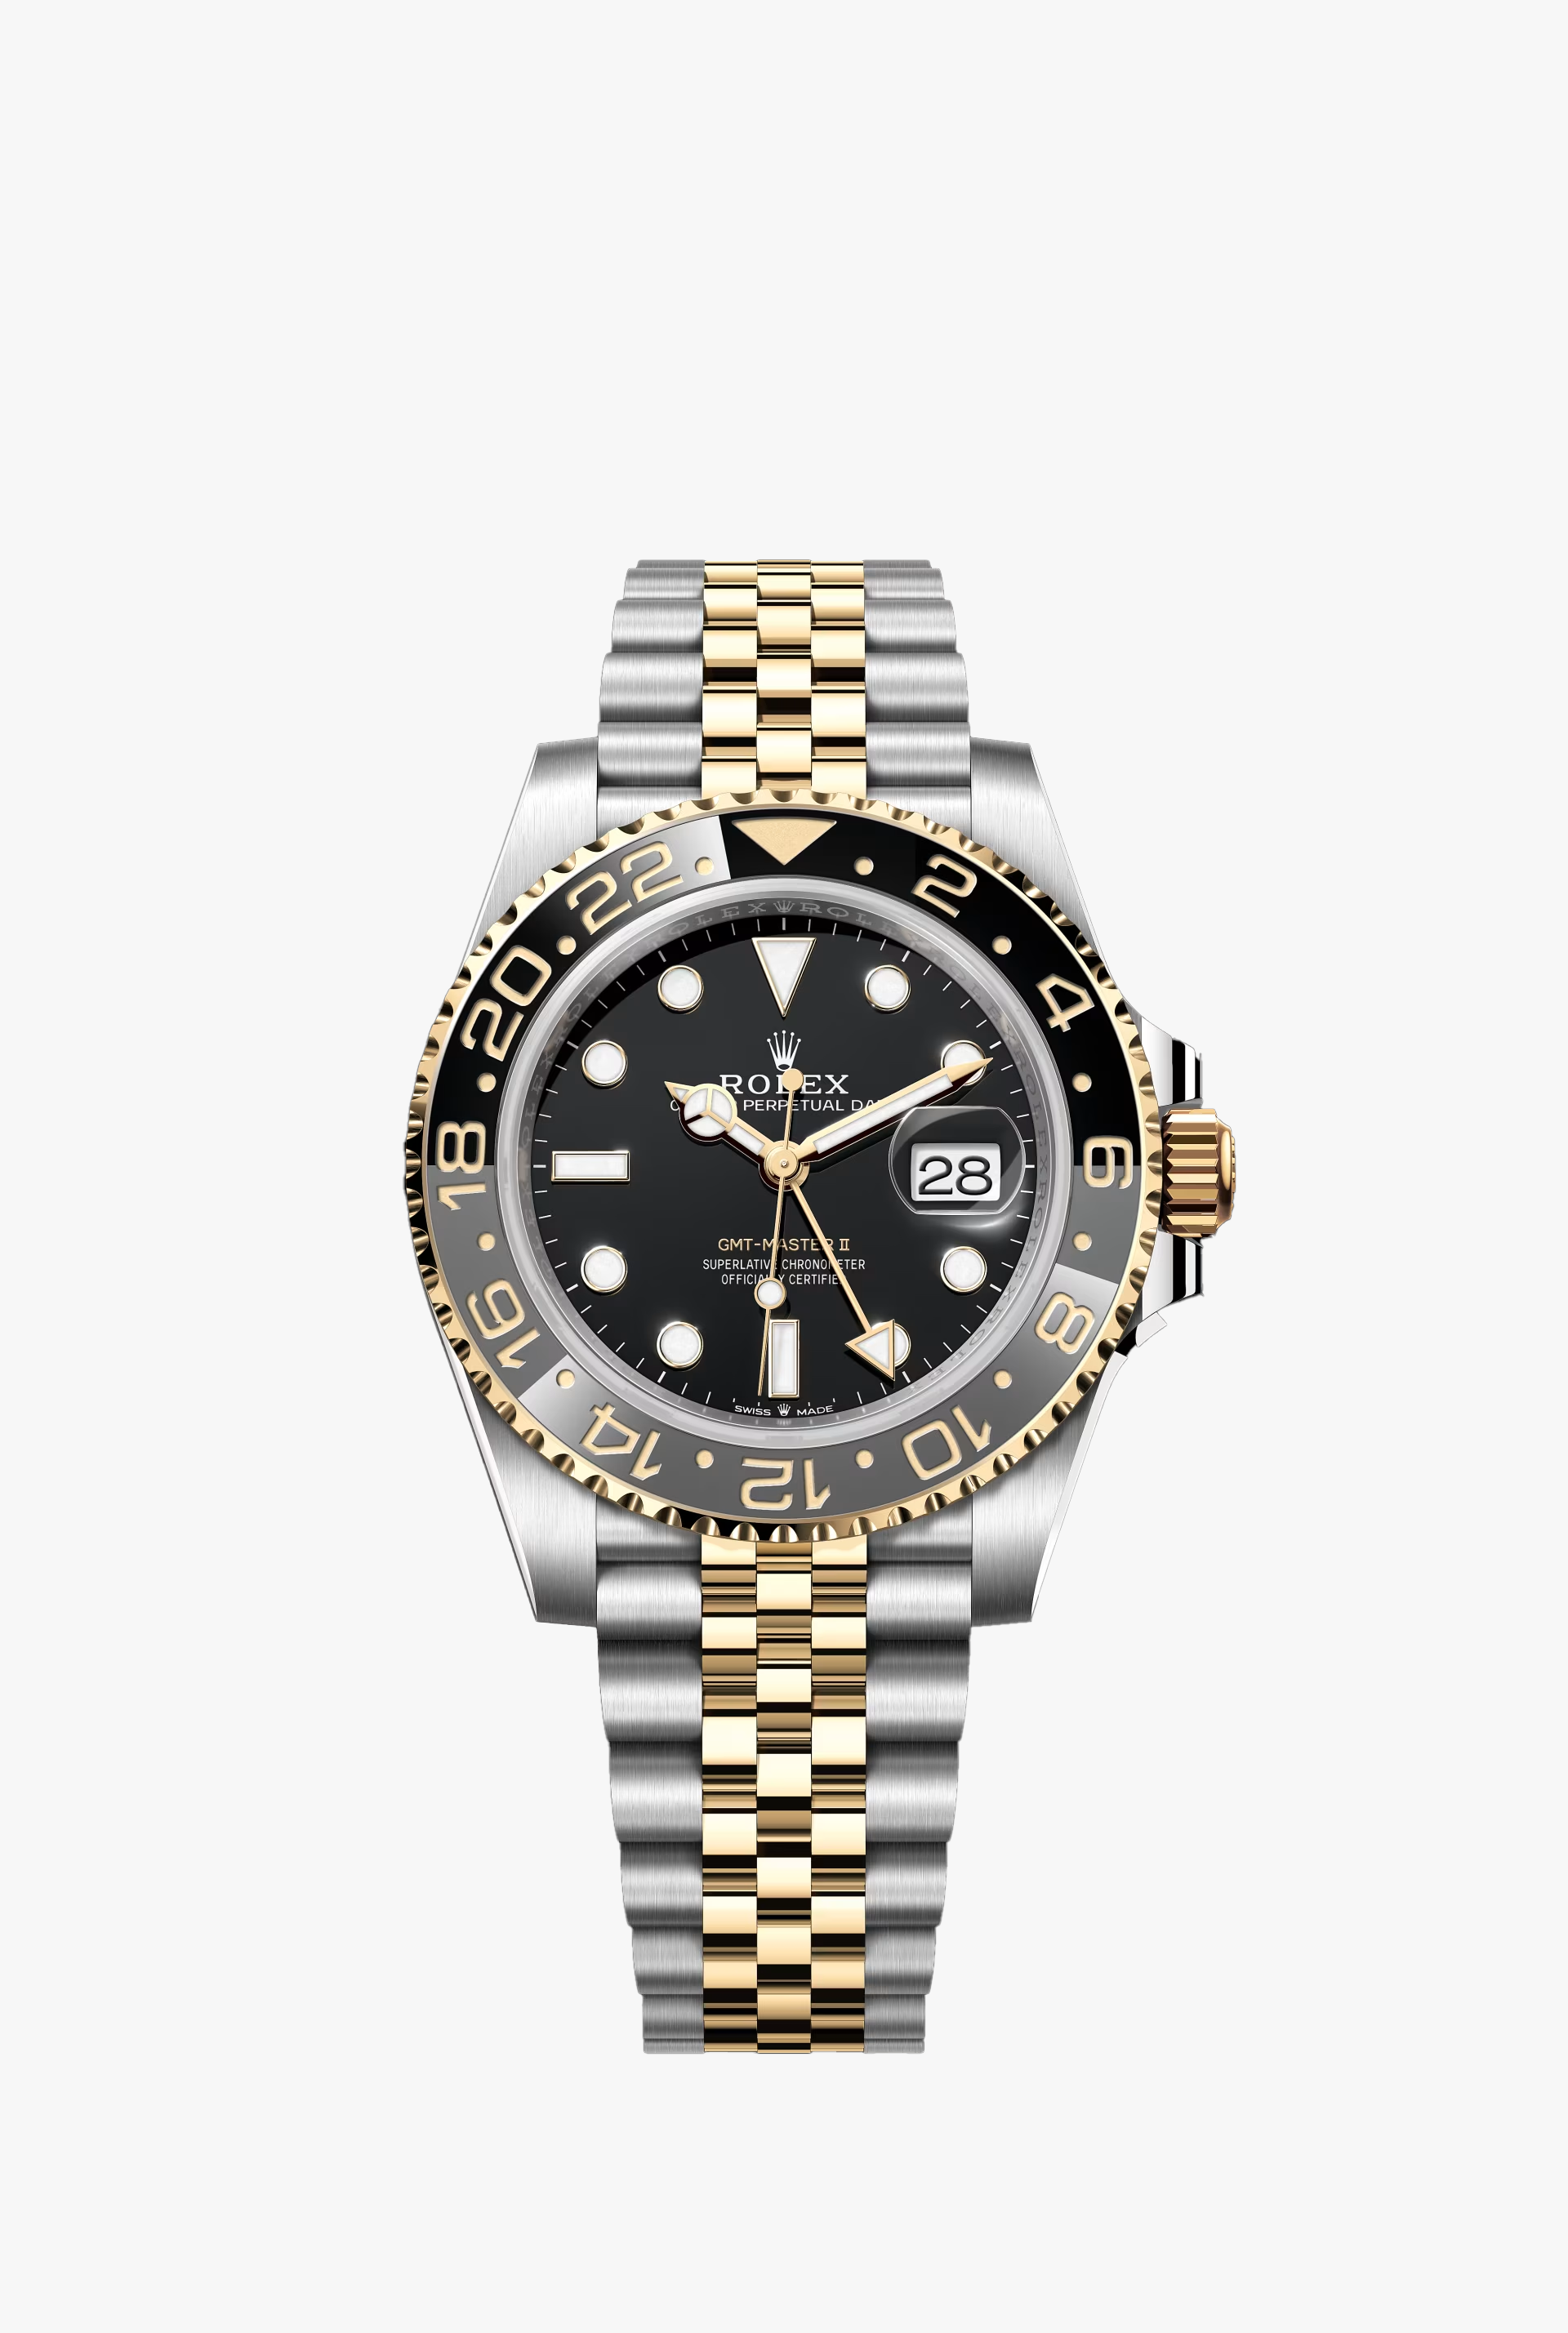 Rolex GMT-Masterl Oyster,40 mm,Oystersteel and yellow gold Reference 126713GRNR